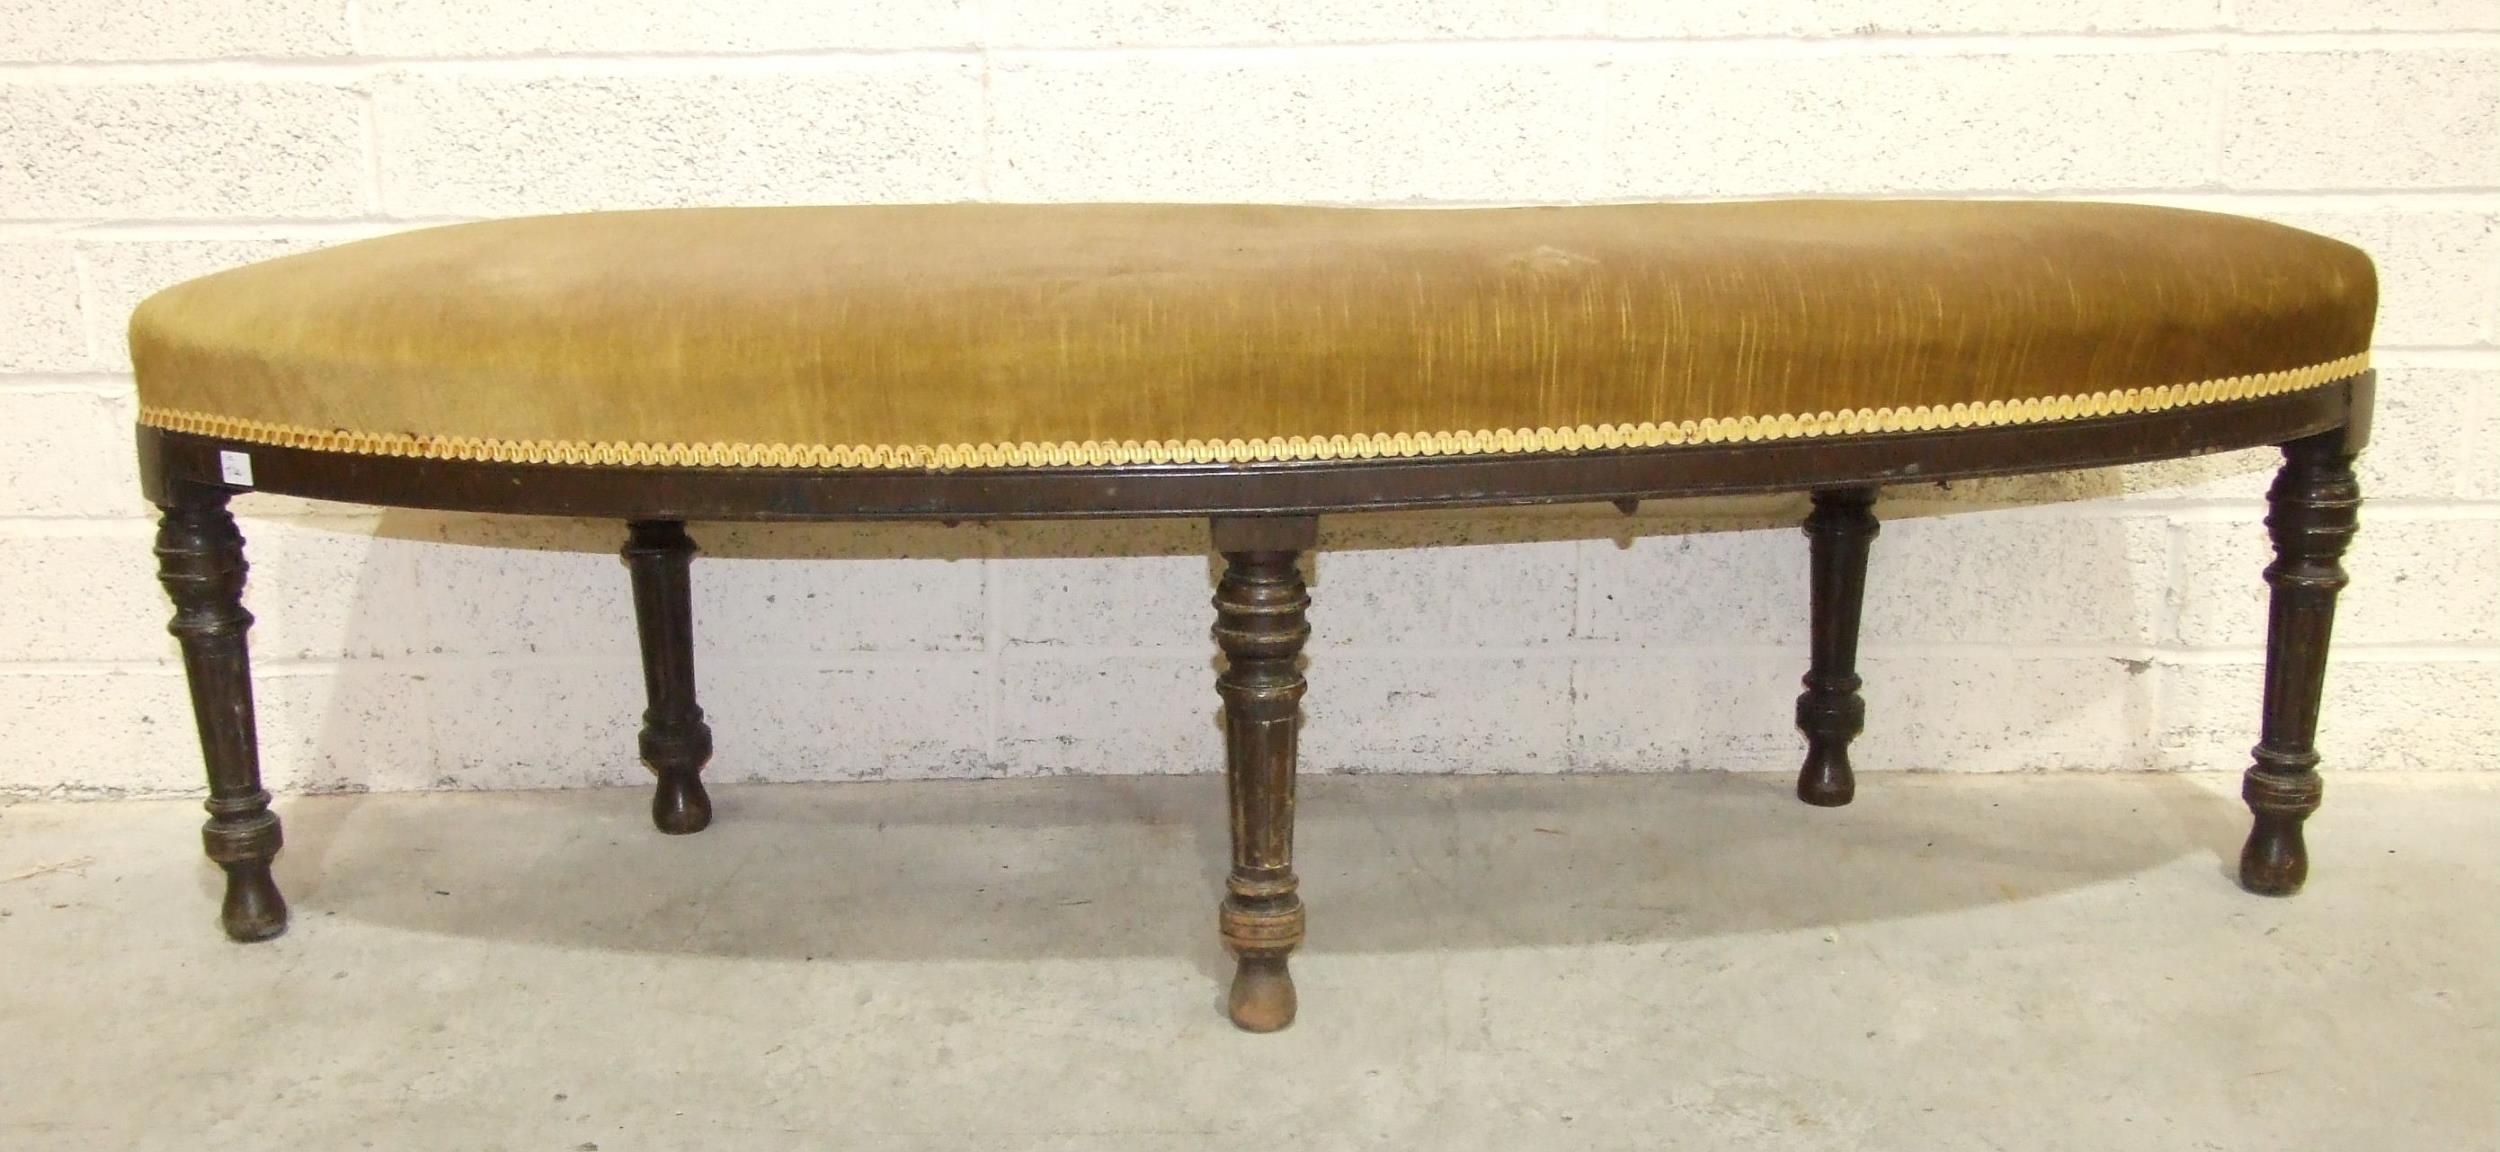 A late-Victorian stained hardwood alcove/window seat with slightly-curved upholstered seat, on